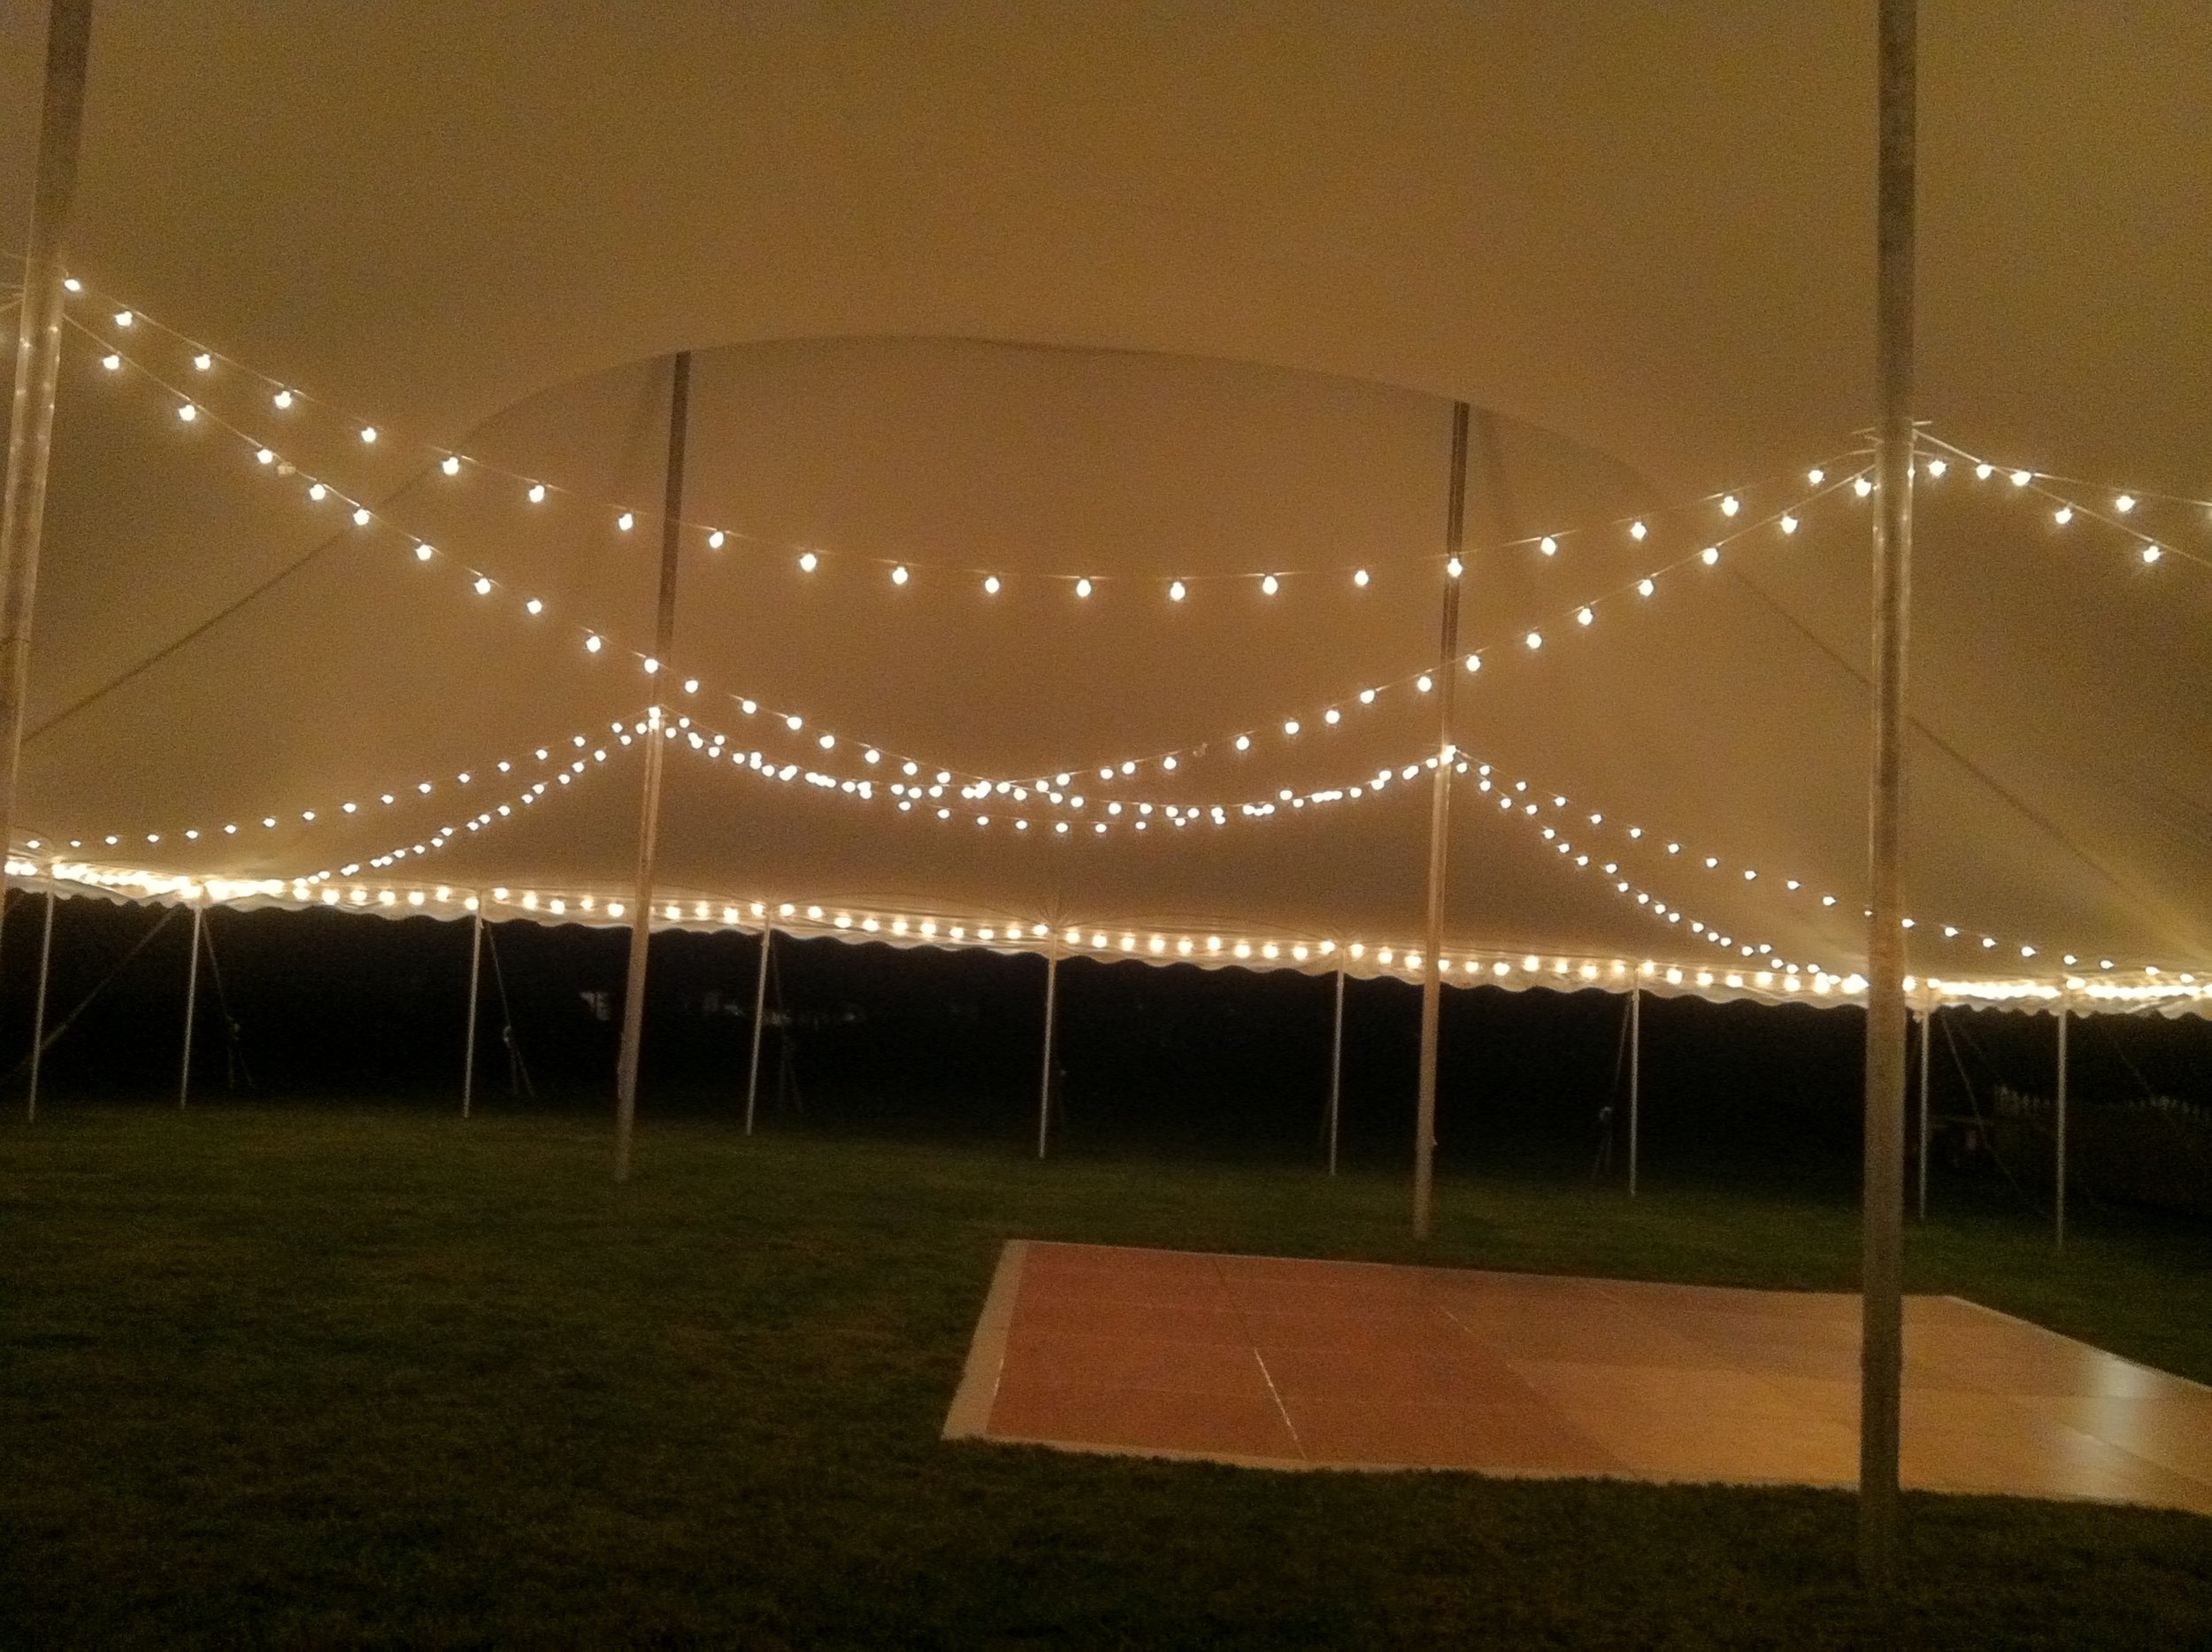 Cherry dance floor and cafe lighting for rent in Pine Grove, PA